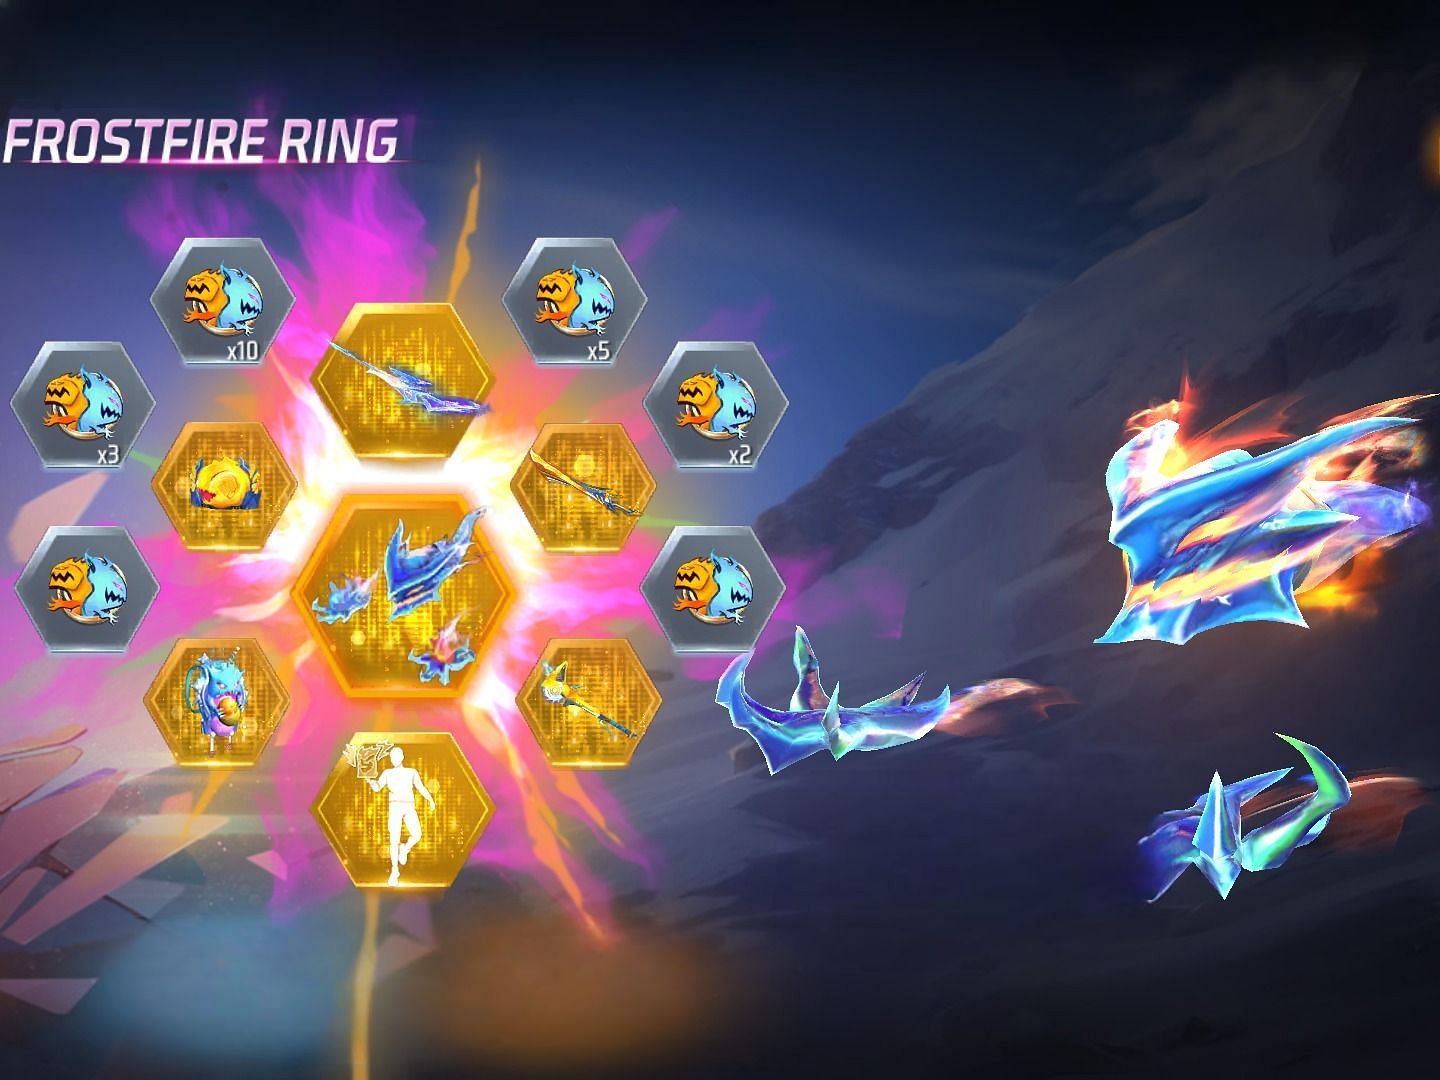 Frostfire Ring event has been added to Free Fire (Image via Garena)